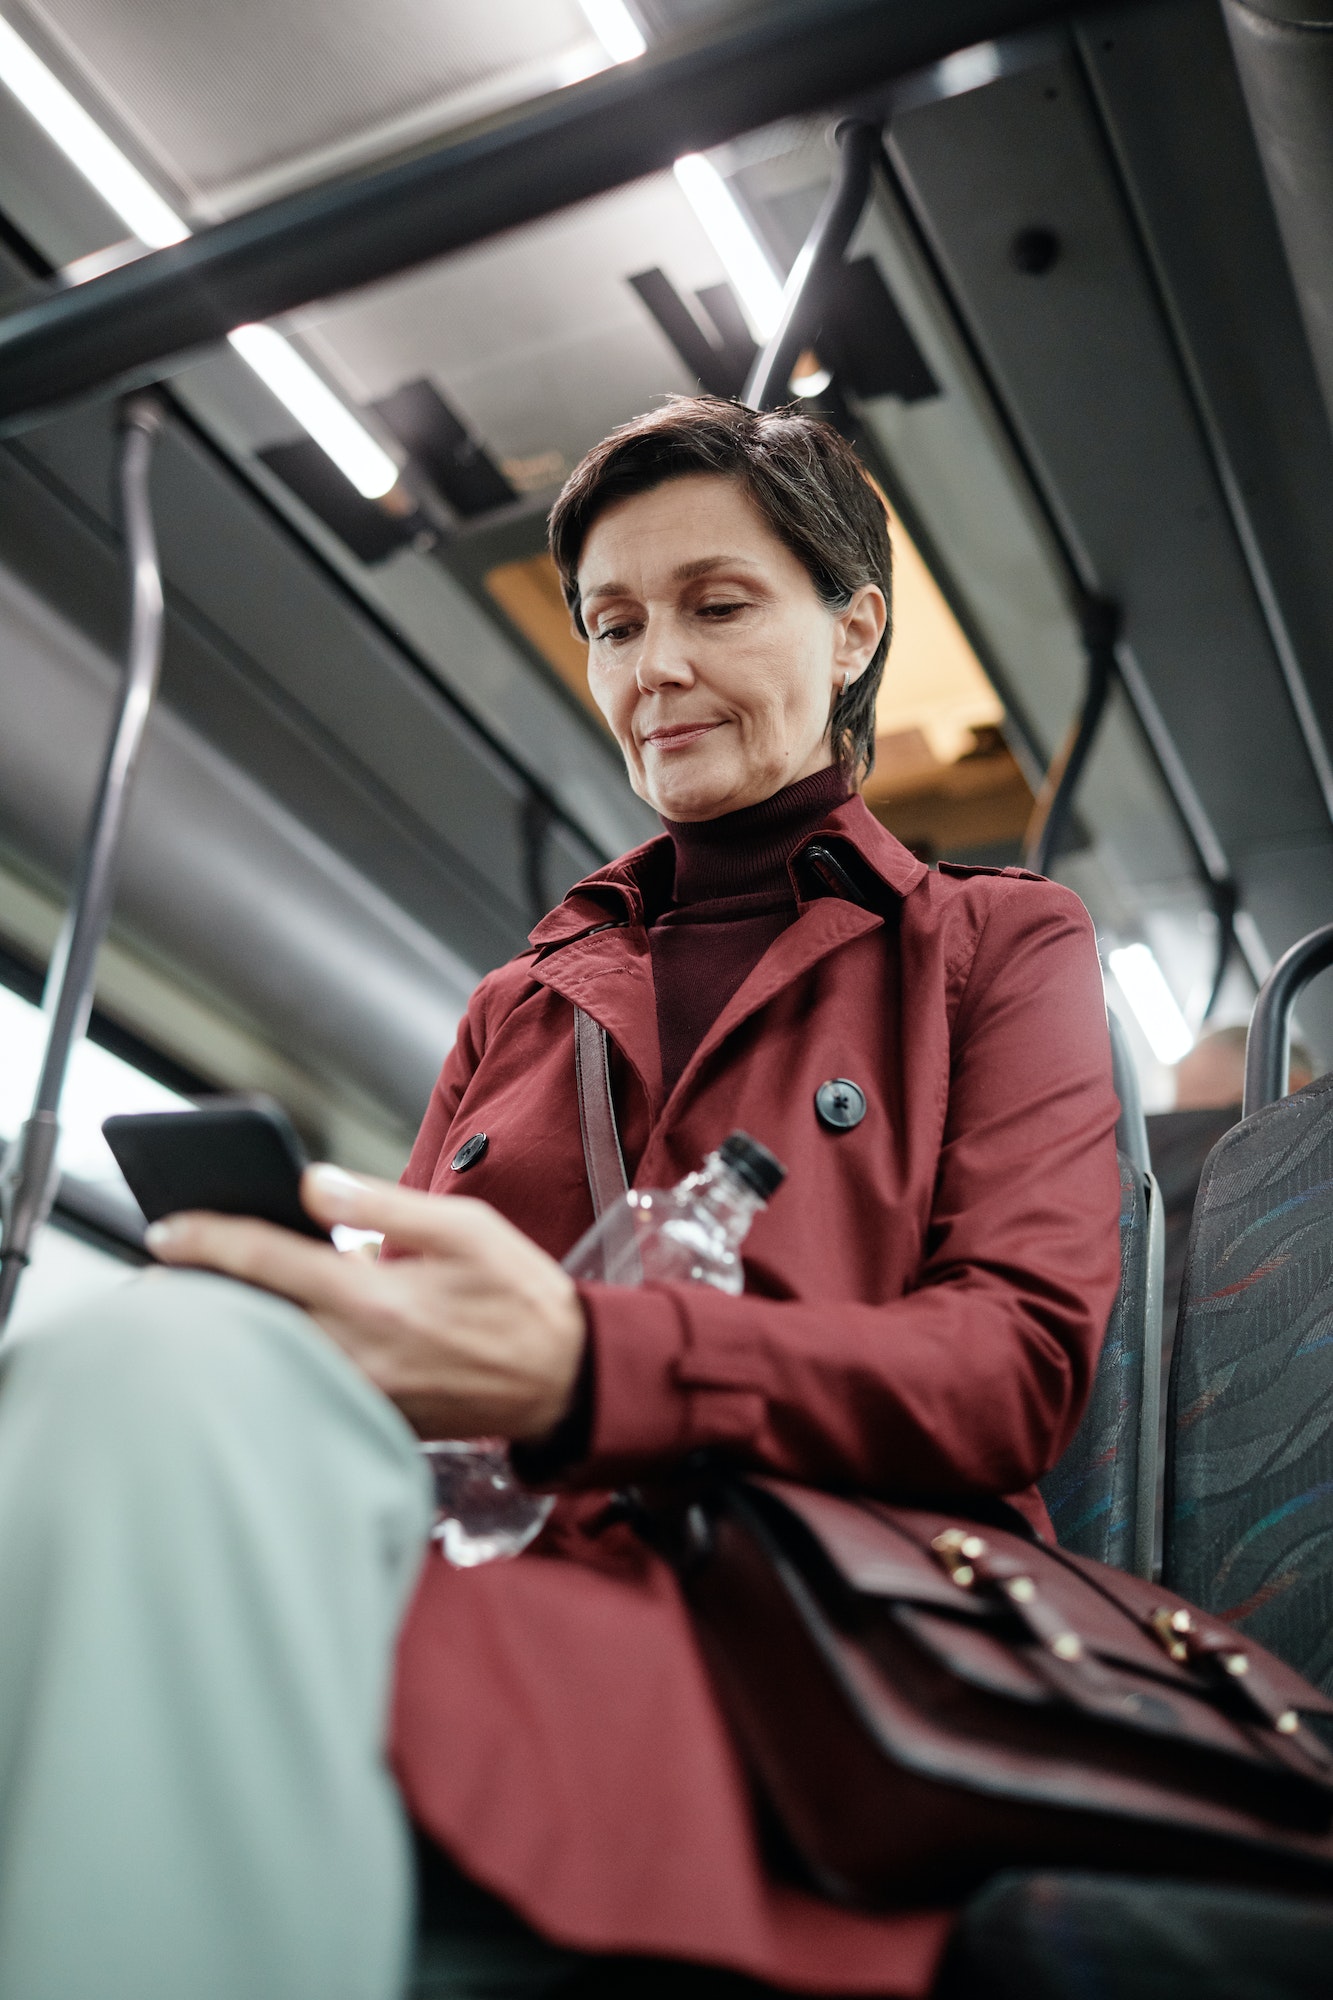 Adult Woman Traveling by Bus in City